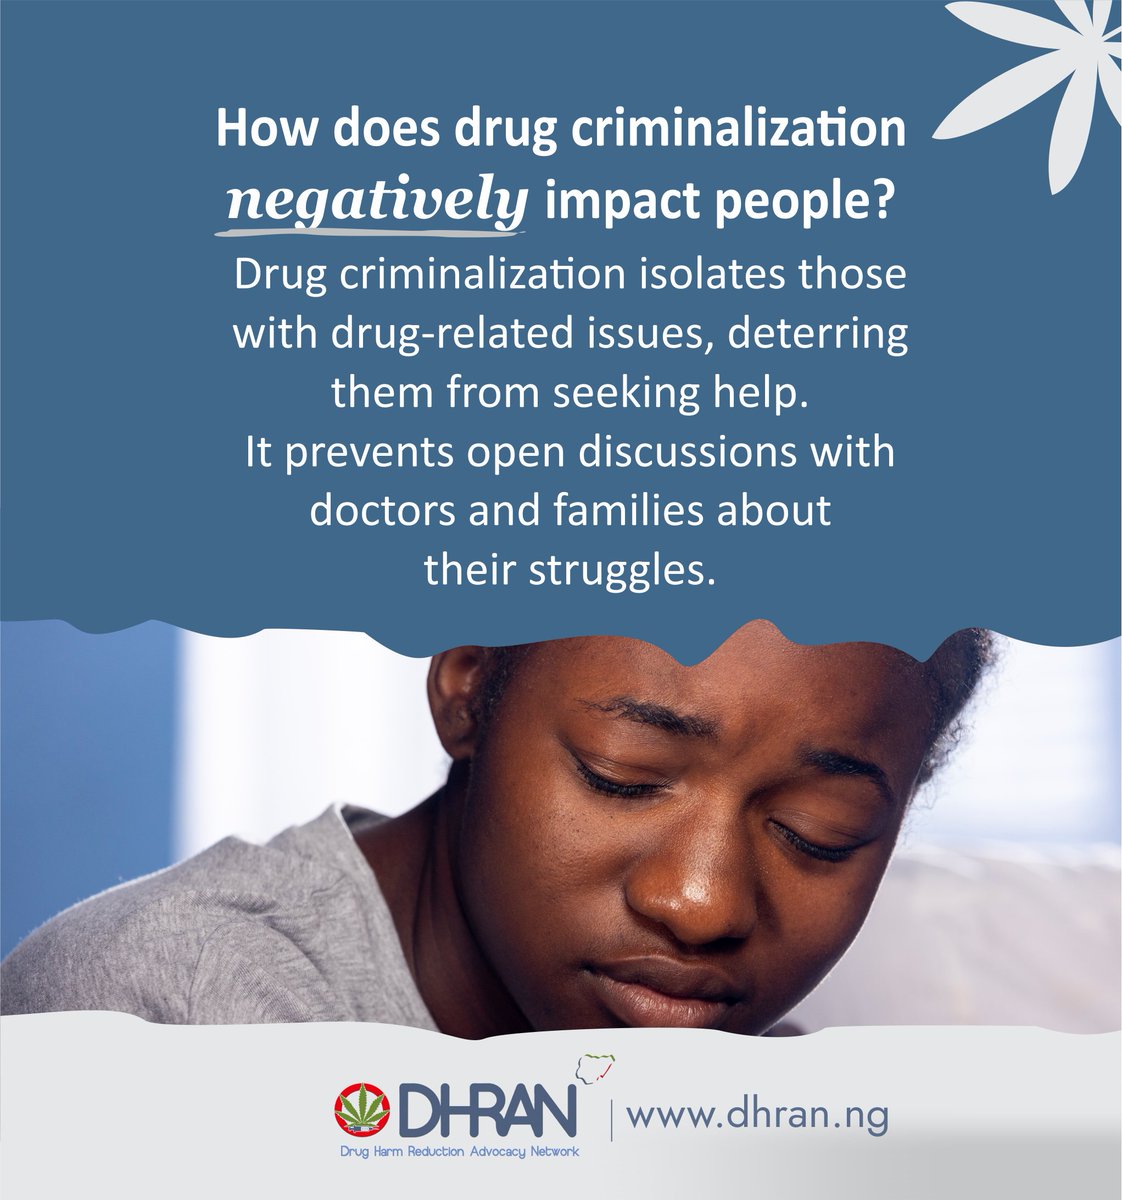 The criminalization of drug use has numerous negative effects, especially on those who are already dealing with drug-related challenges. 
#DrugUse #DrugCriminalization #Nigeria #DHRAn #DrugUser